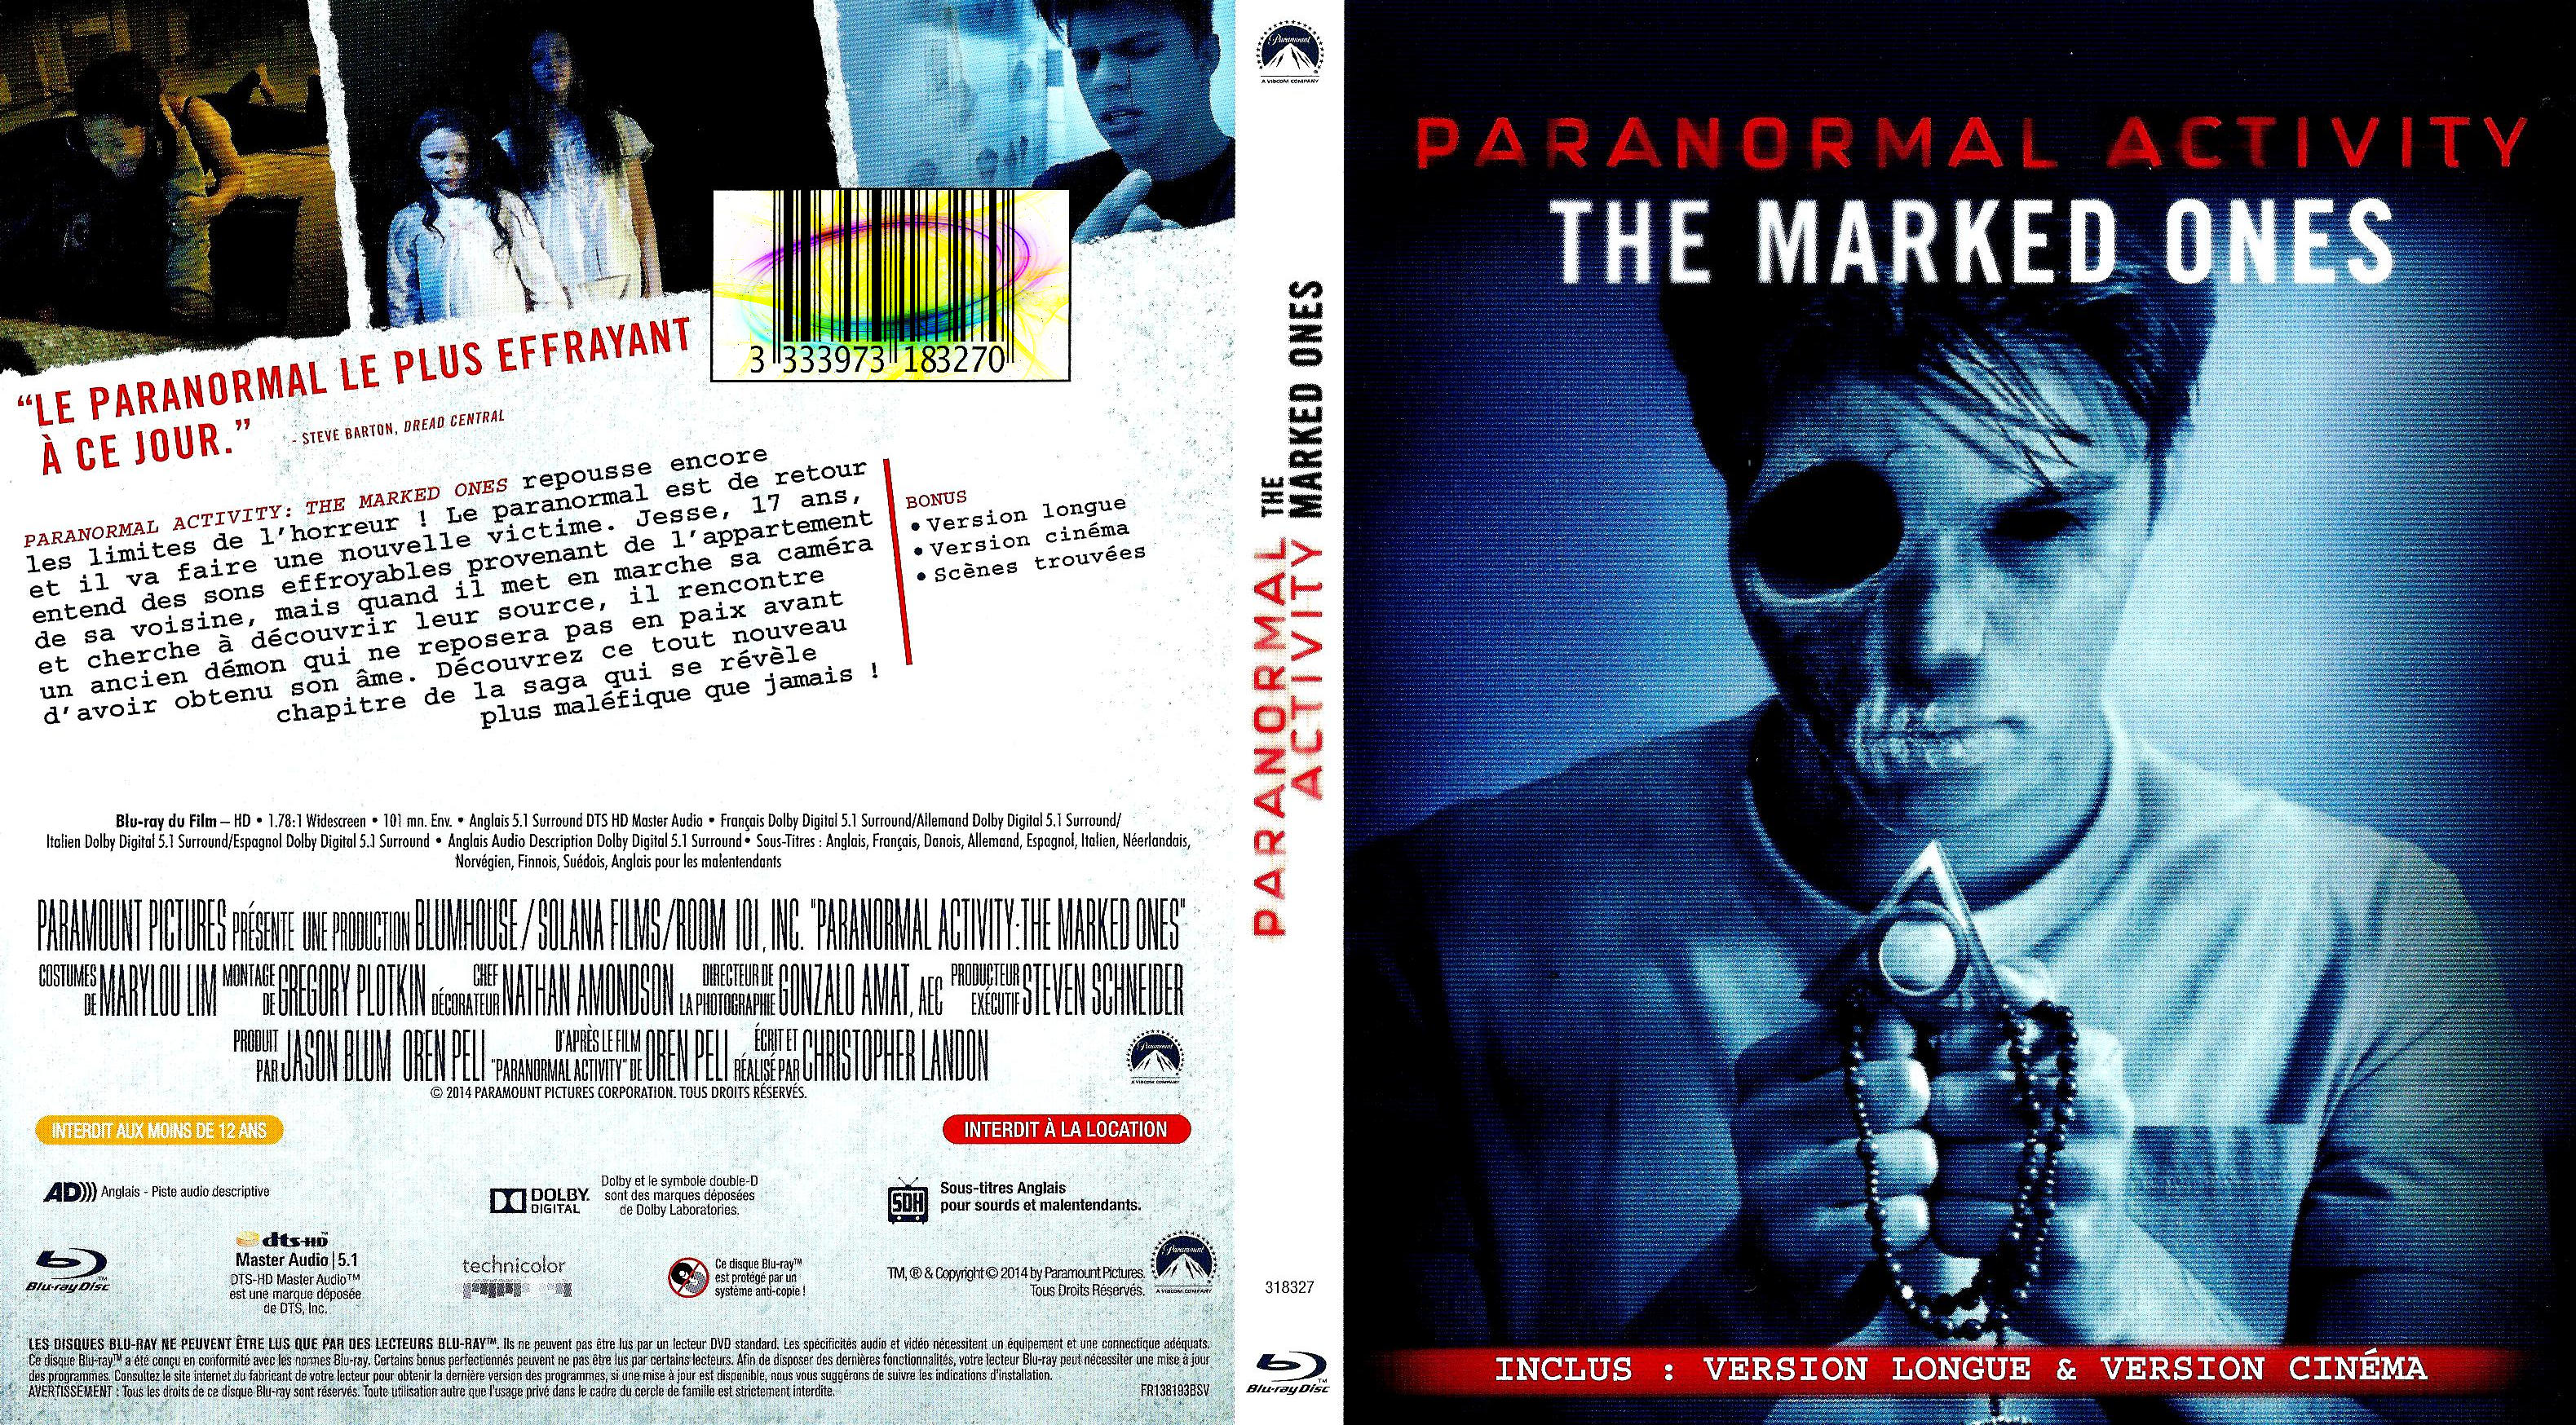 Jaquette Dvd De Paranormal Activity The Marked Ones Blu Ray Cinéma Passion